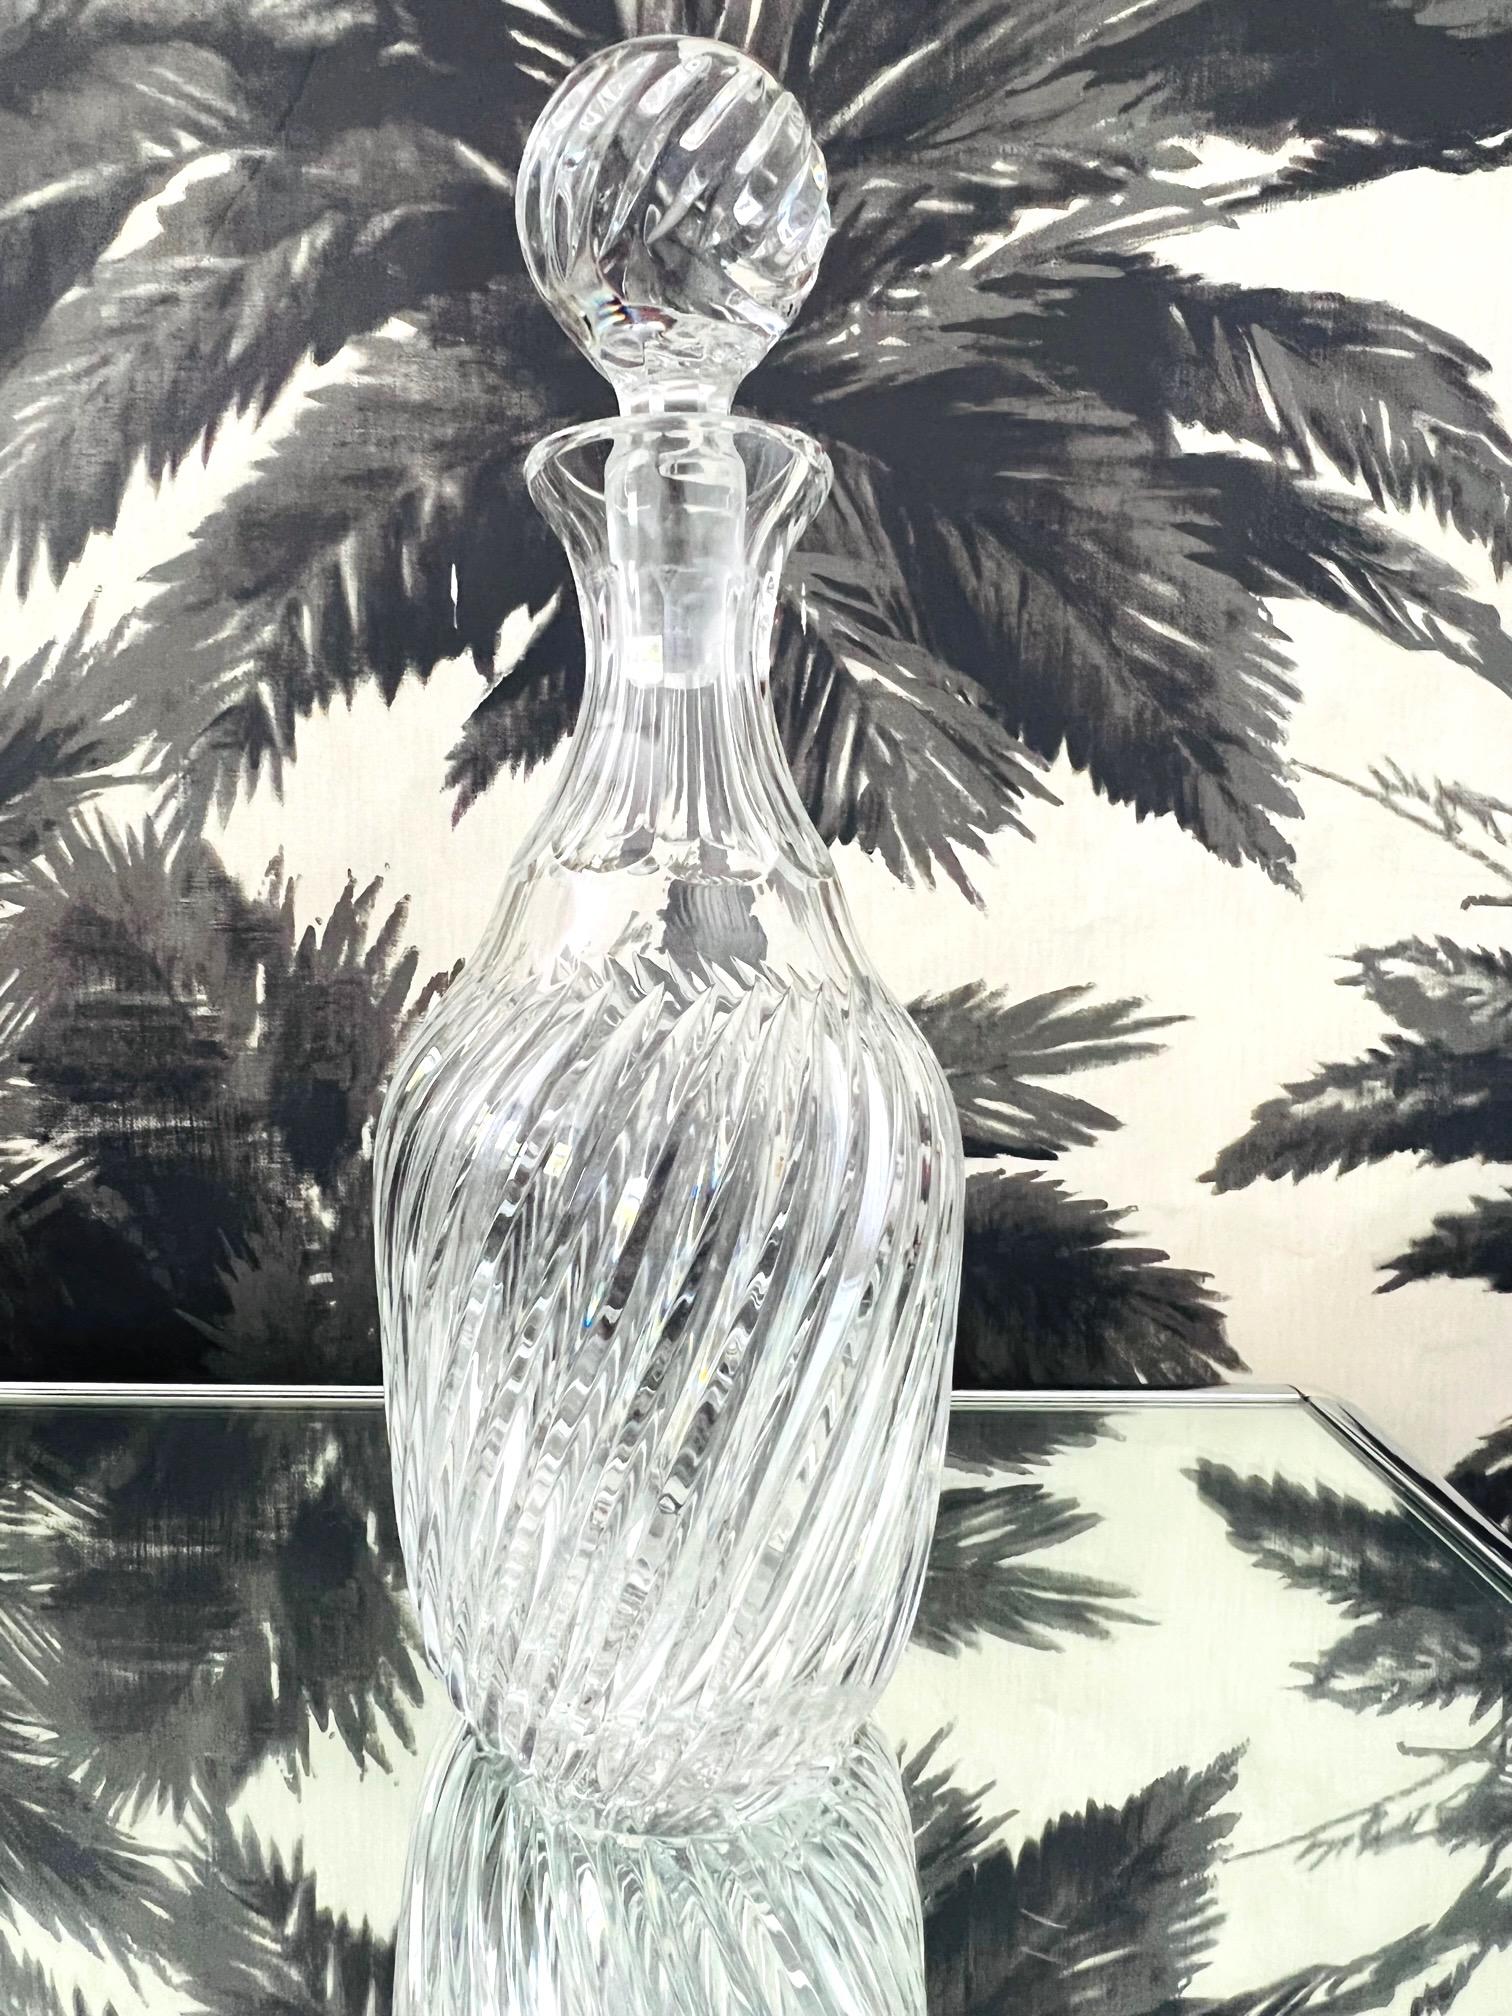 Vintage French Crystal Decanter with Hand-Cut Swirl Designs, c. 1970's 5